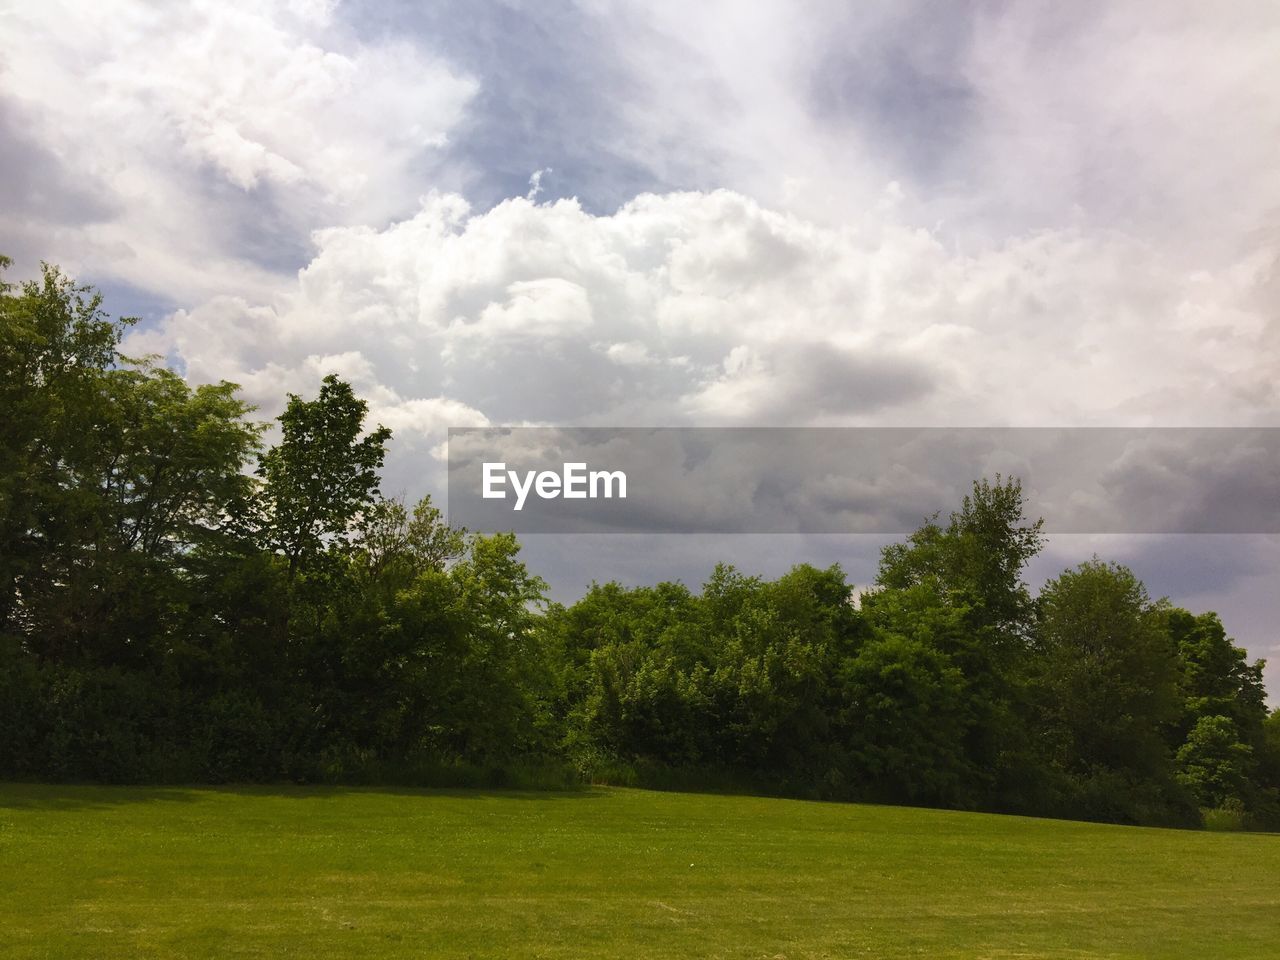 TREES ON GRASSY FIELD AGAINST CLOUDY SKY